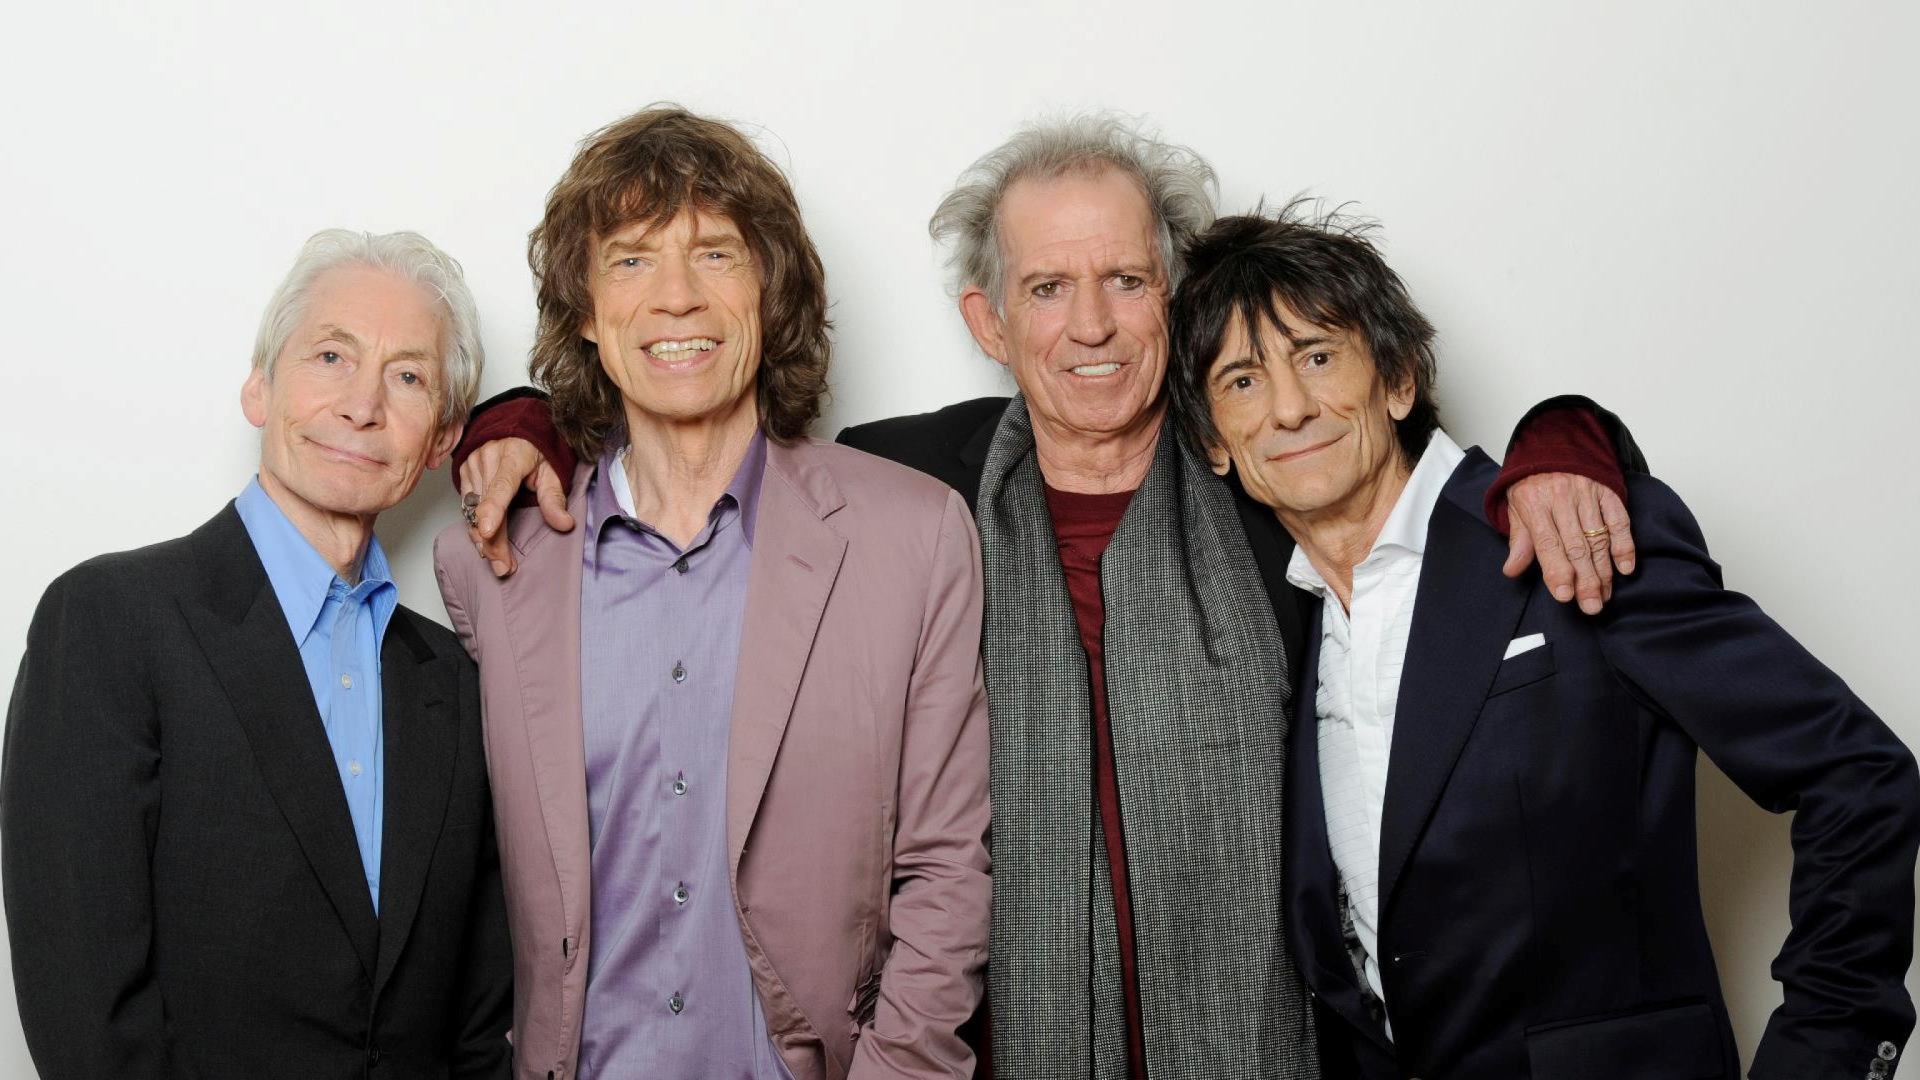 Rolling Stones, Mick Jagger, Keith Richards, Charlie Watts, Ron Wood wallpaper 1920x1080